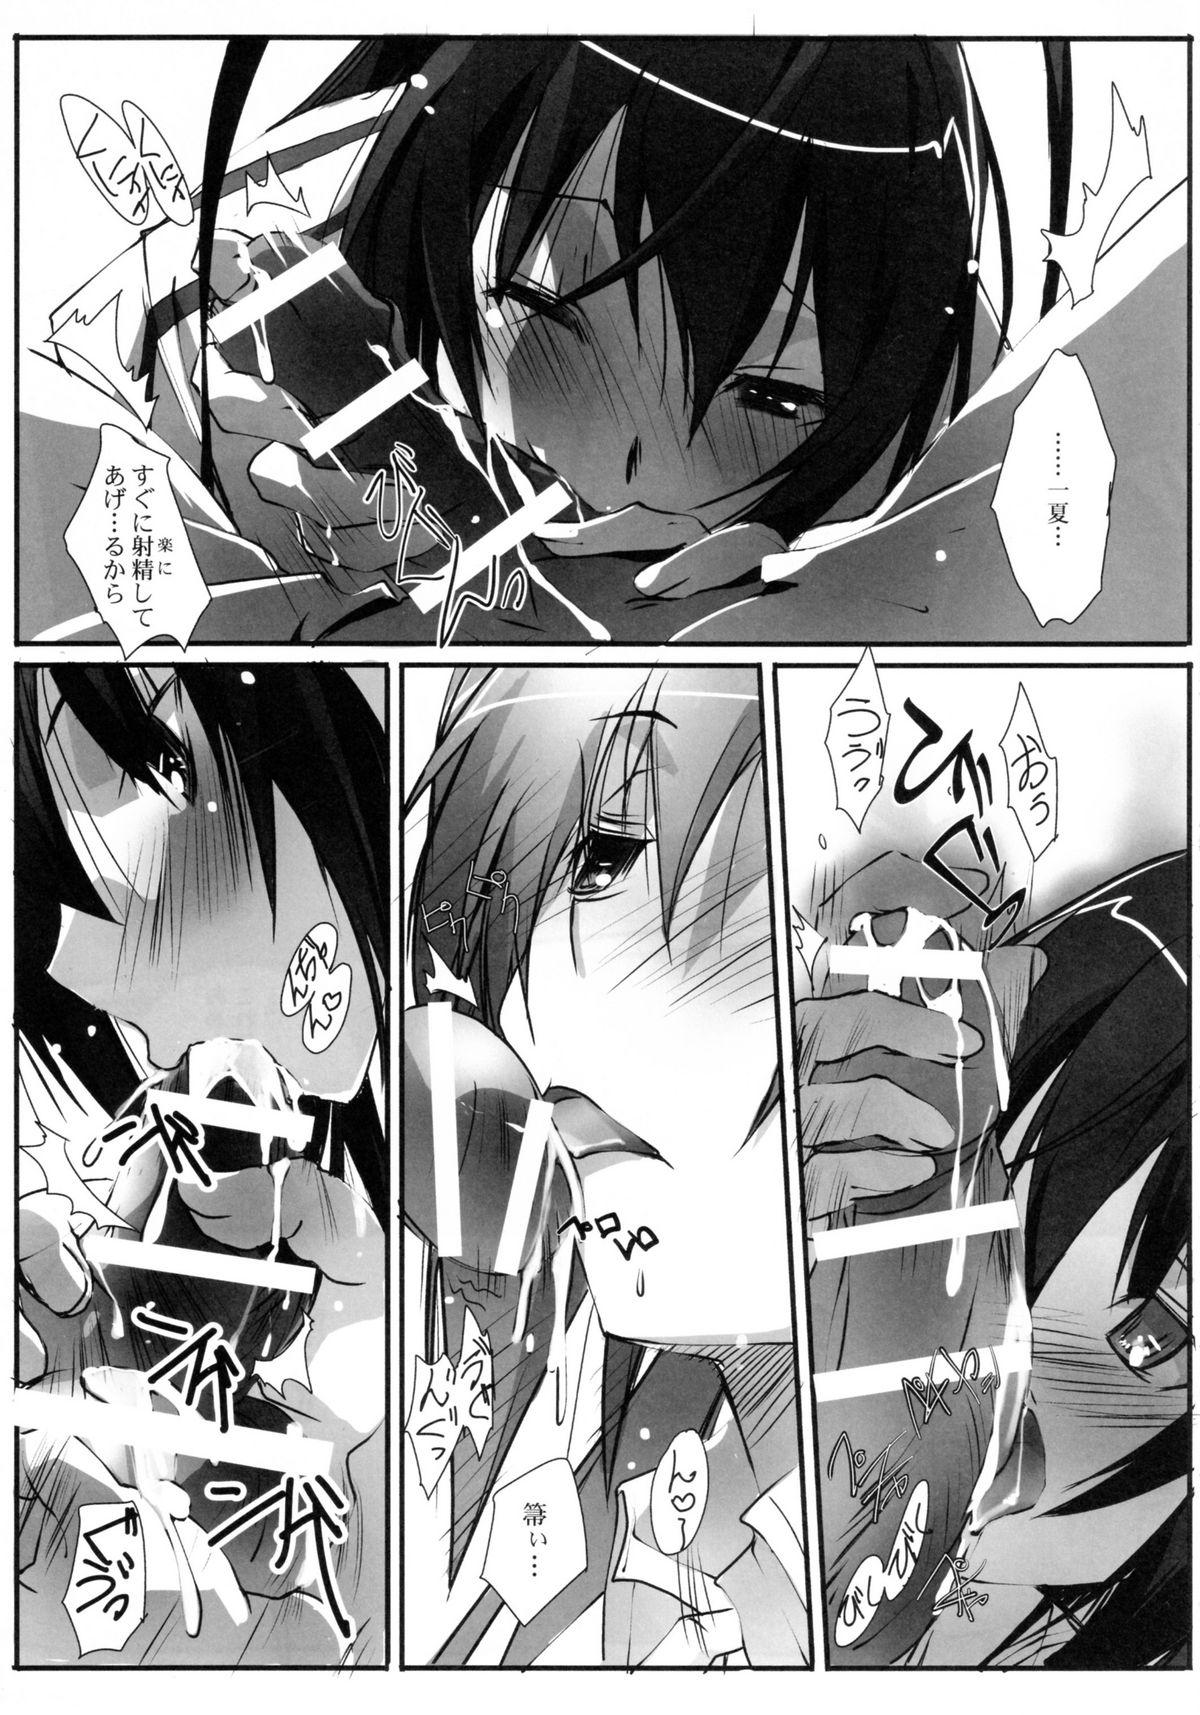 Family LS Lovers Striker - Infinite stratos Edging - Page 6